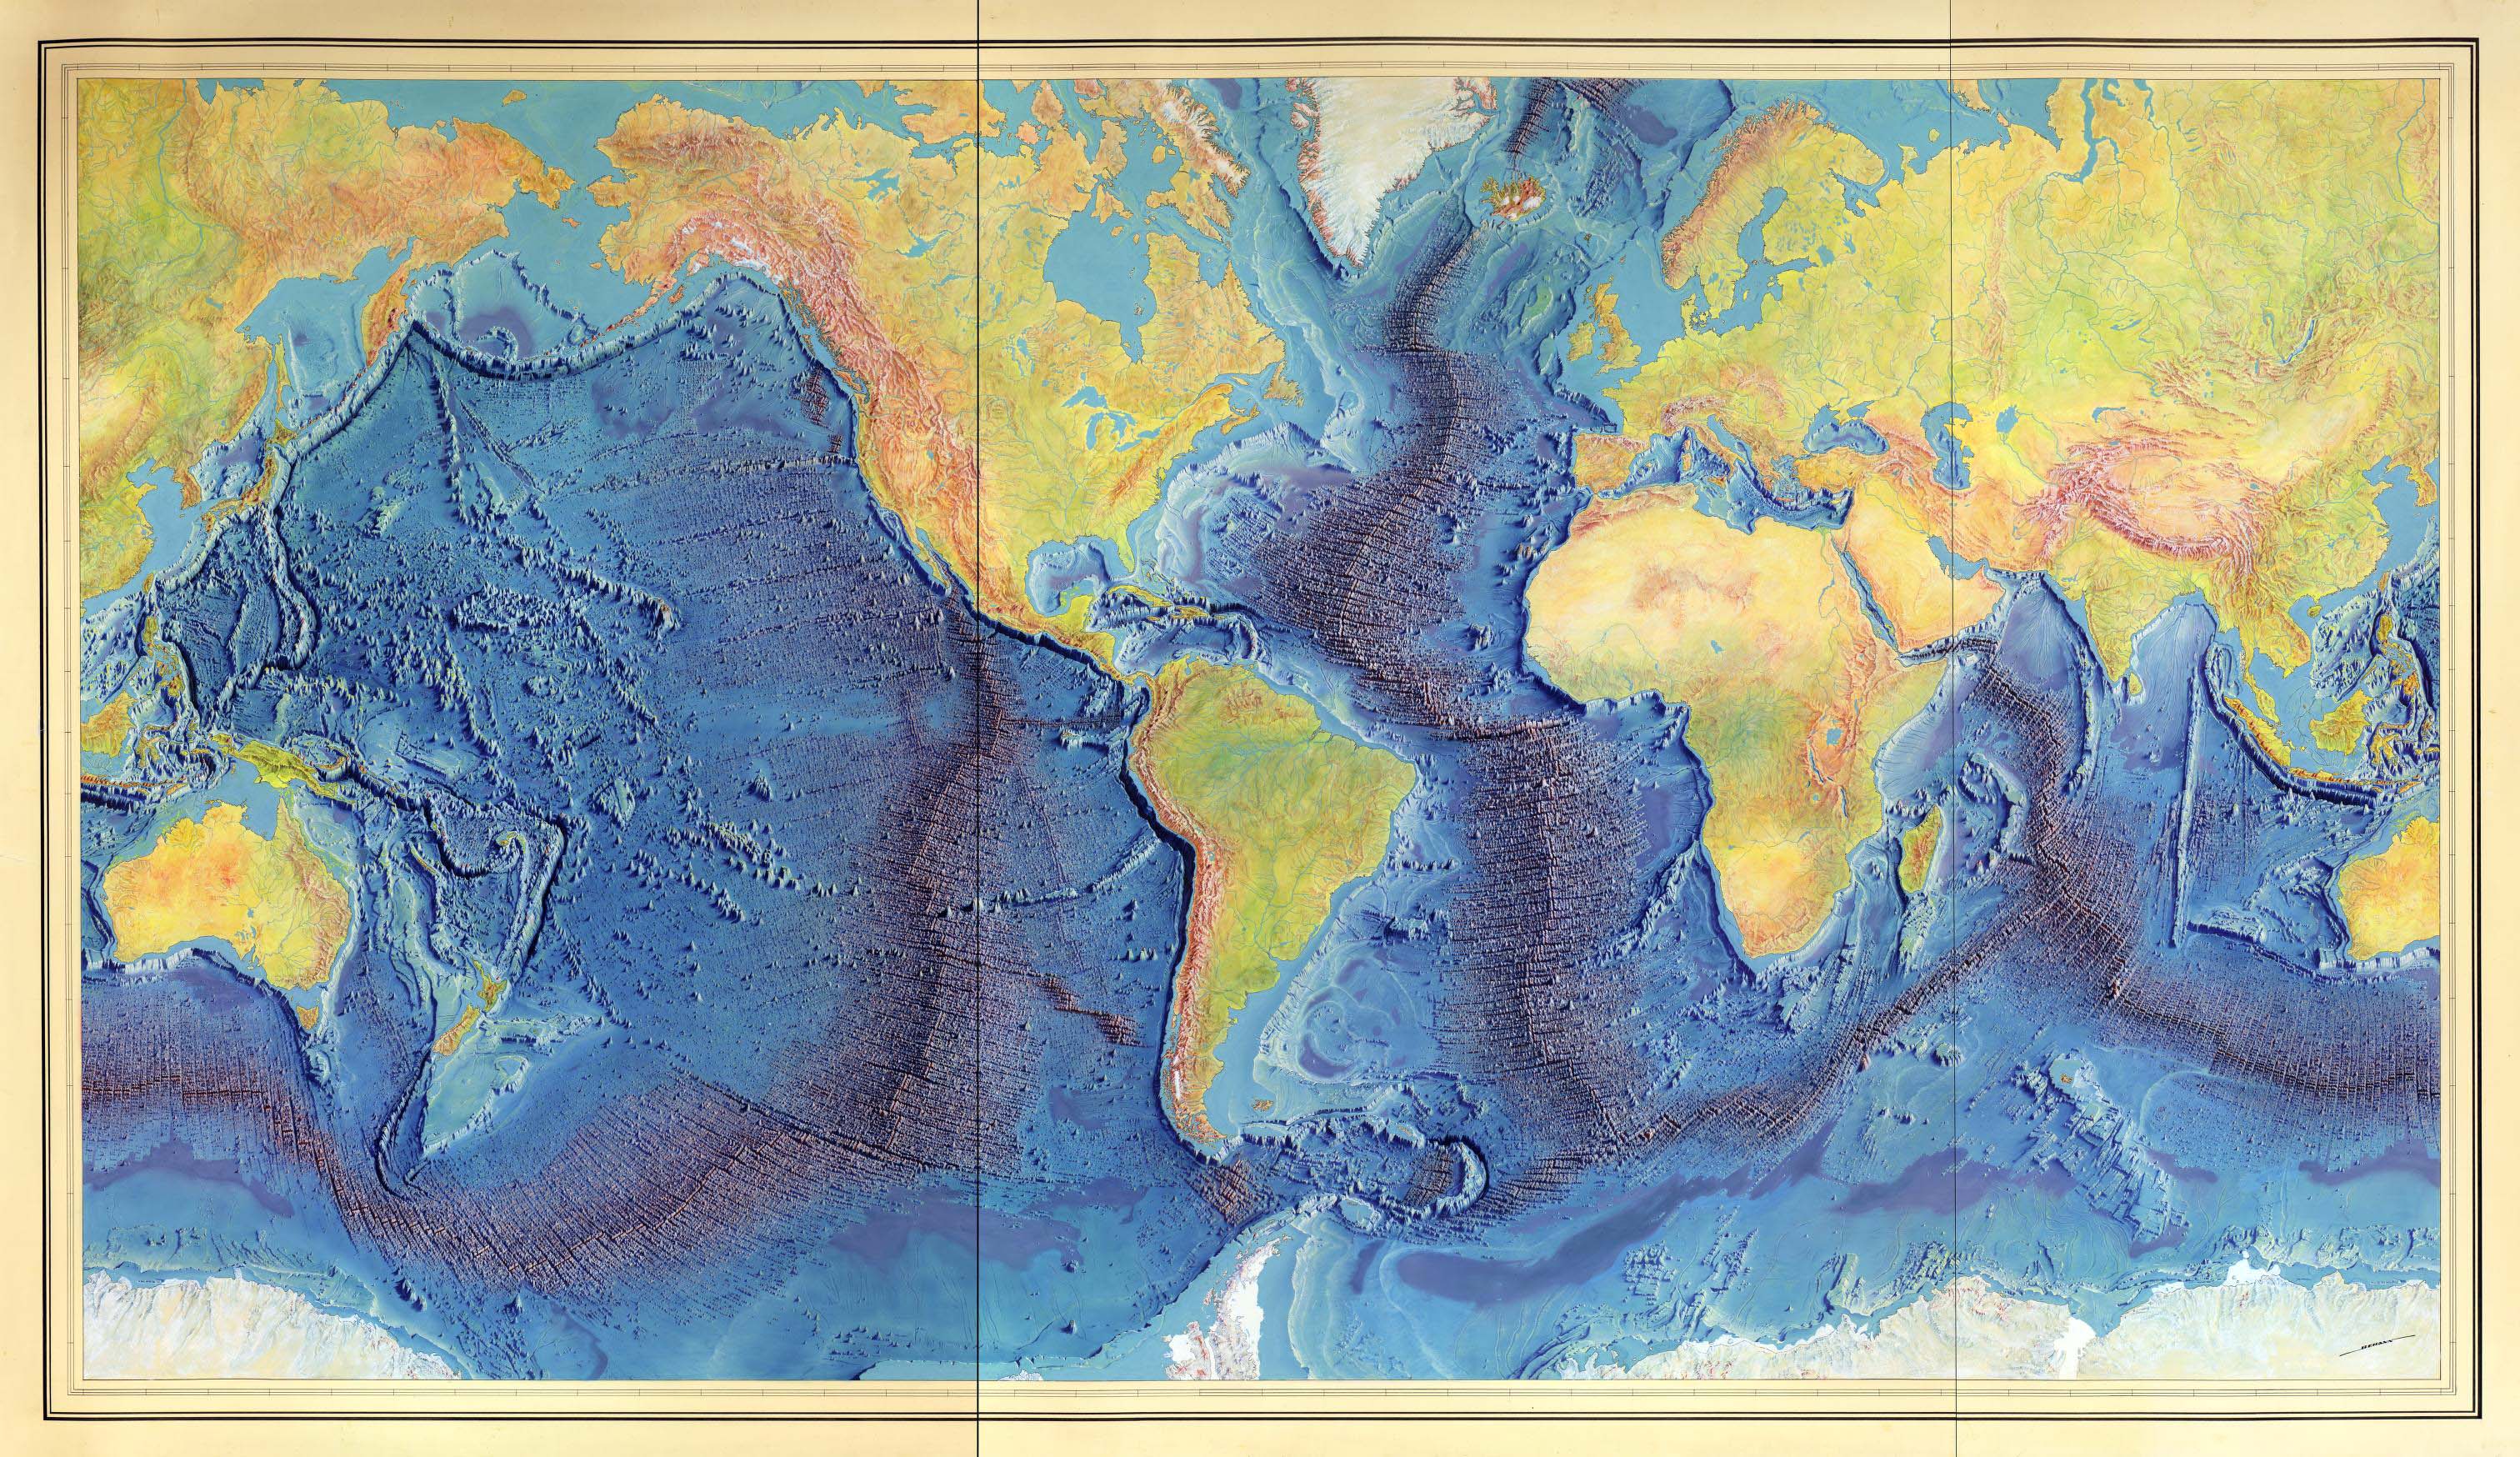 Image of a manuscript painting of the 1977 World Ocean Floor Panorama by Marie Tharp and Bruce Heezen